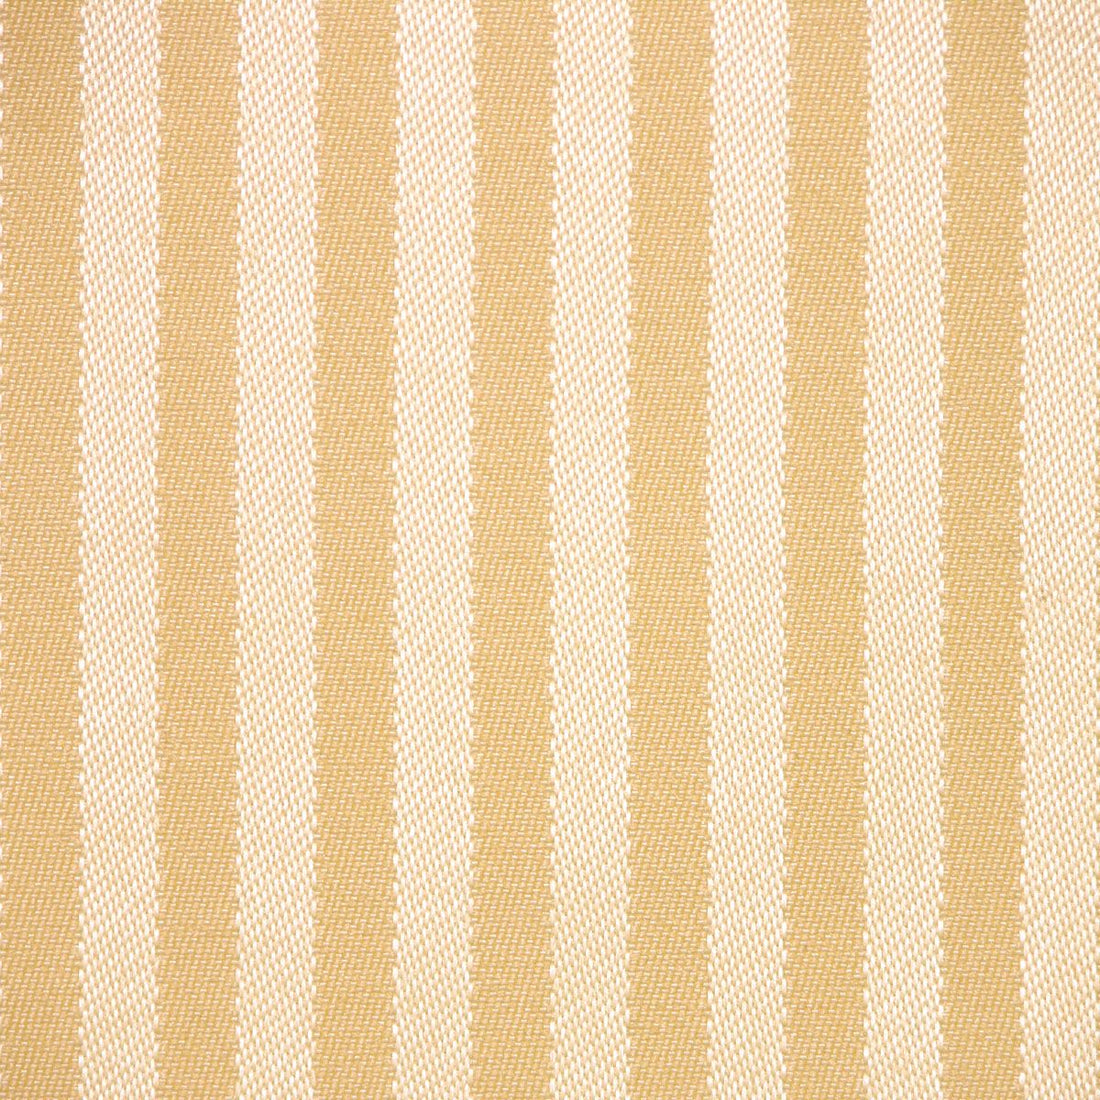 Davenport fabric in dune color - pattern number WR 52492244 - by Scalamandre in the Old World Weavers collection